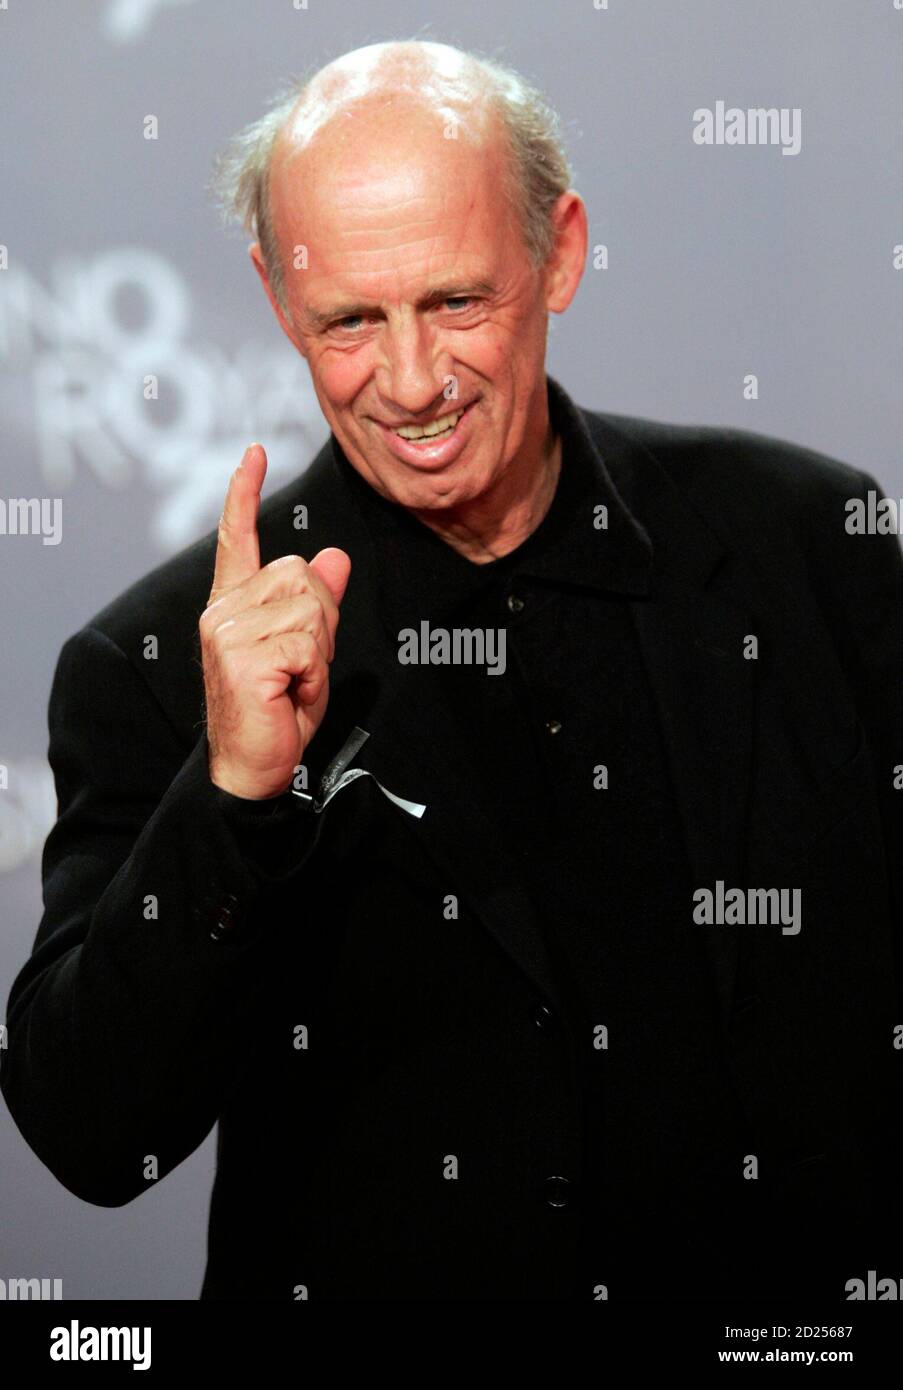 German fashion designer Willy Bogner poses on the red carpet for the German  premiere of the latest James Bond movie "Casino Royale" in Berlin November  21, 2006. "Casino Royale" will open in